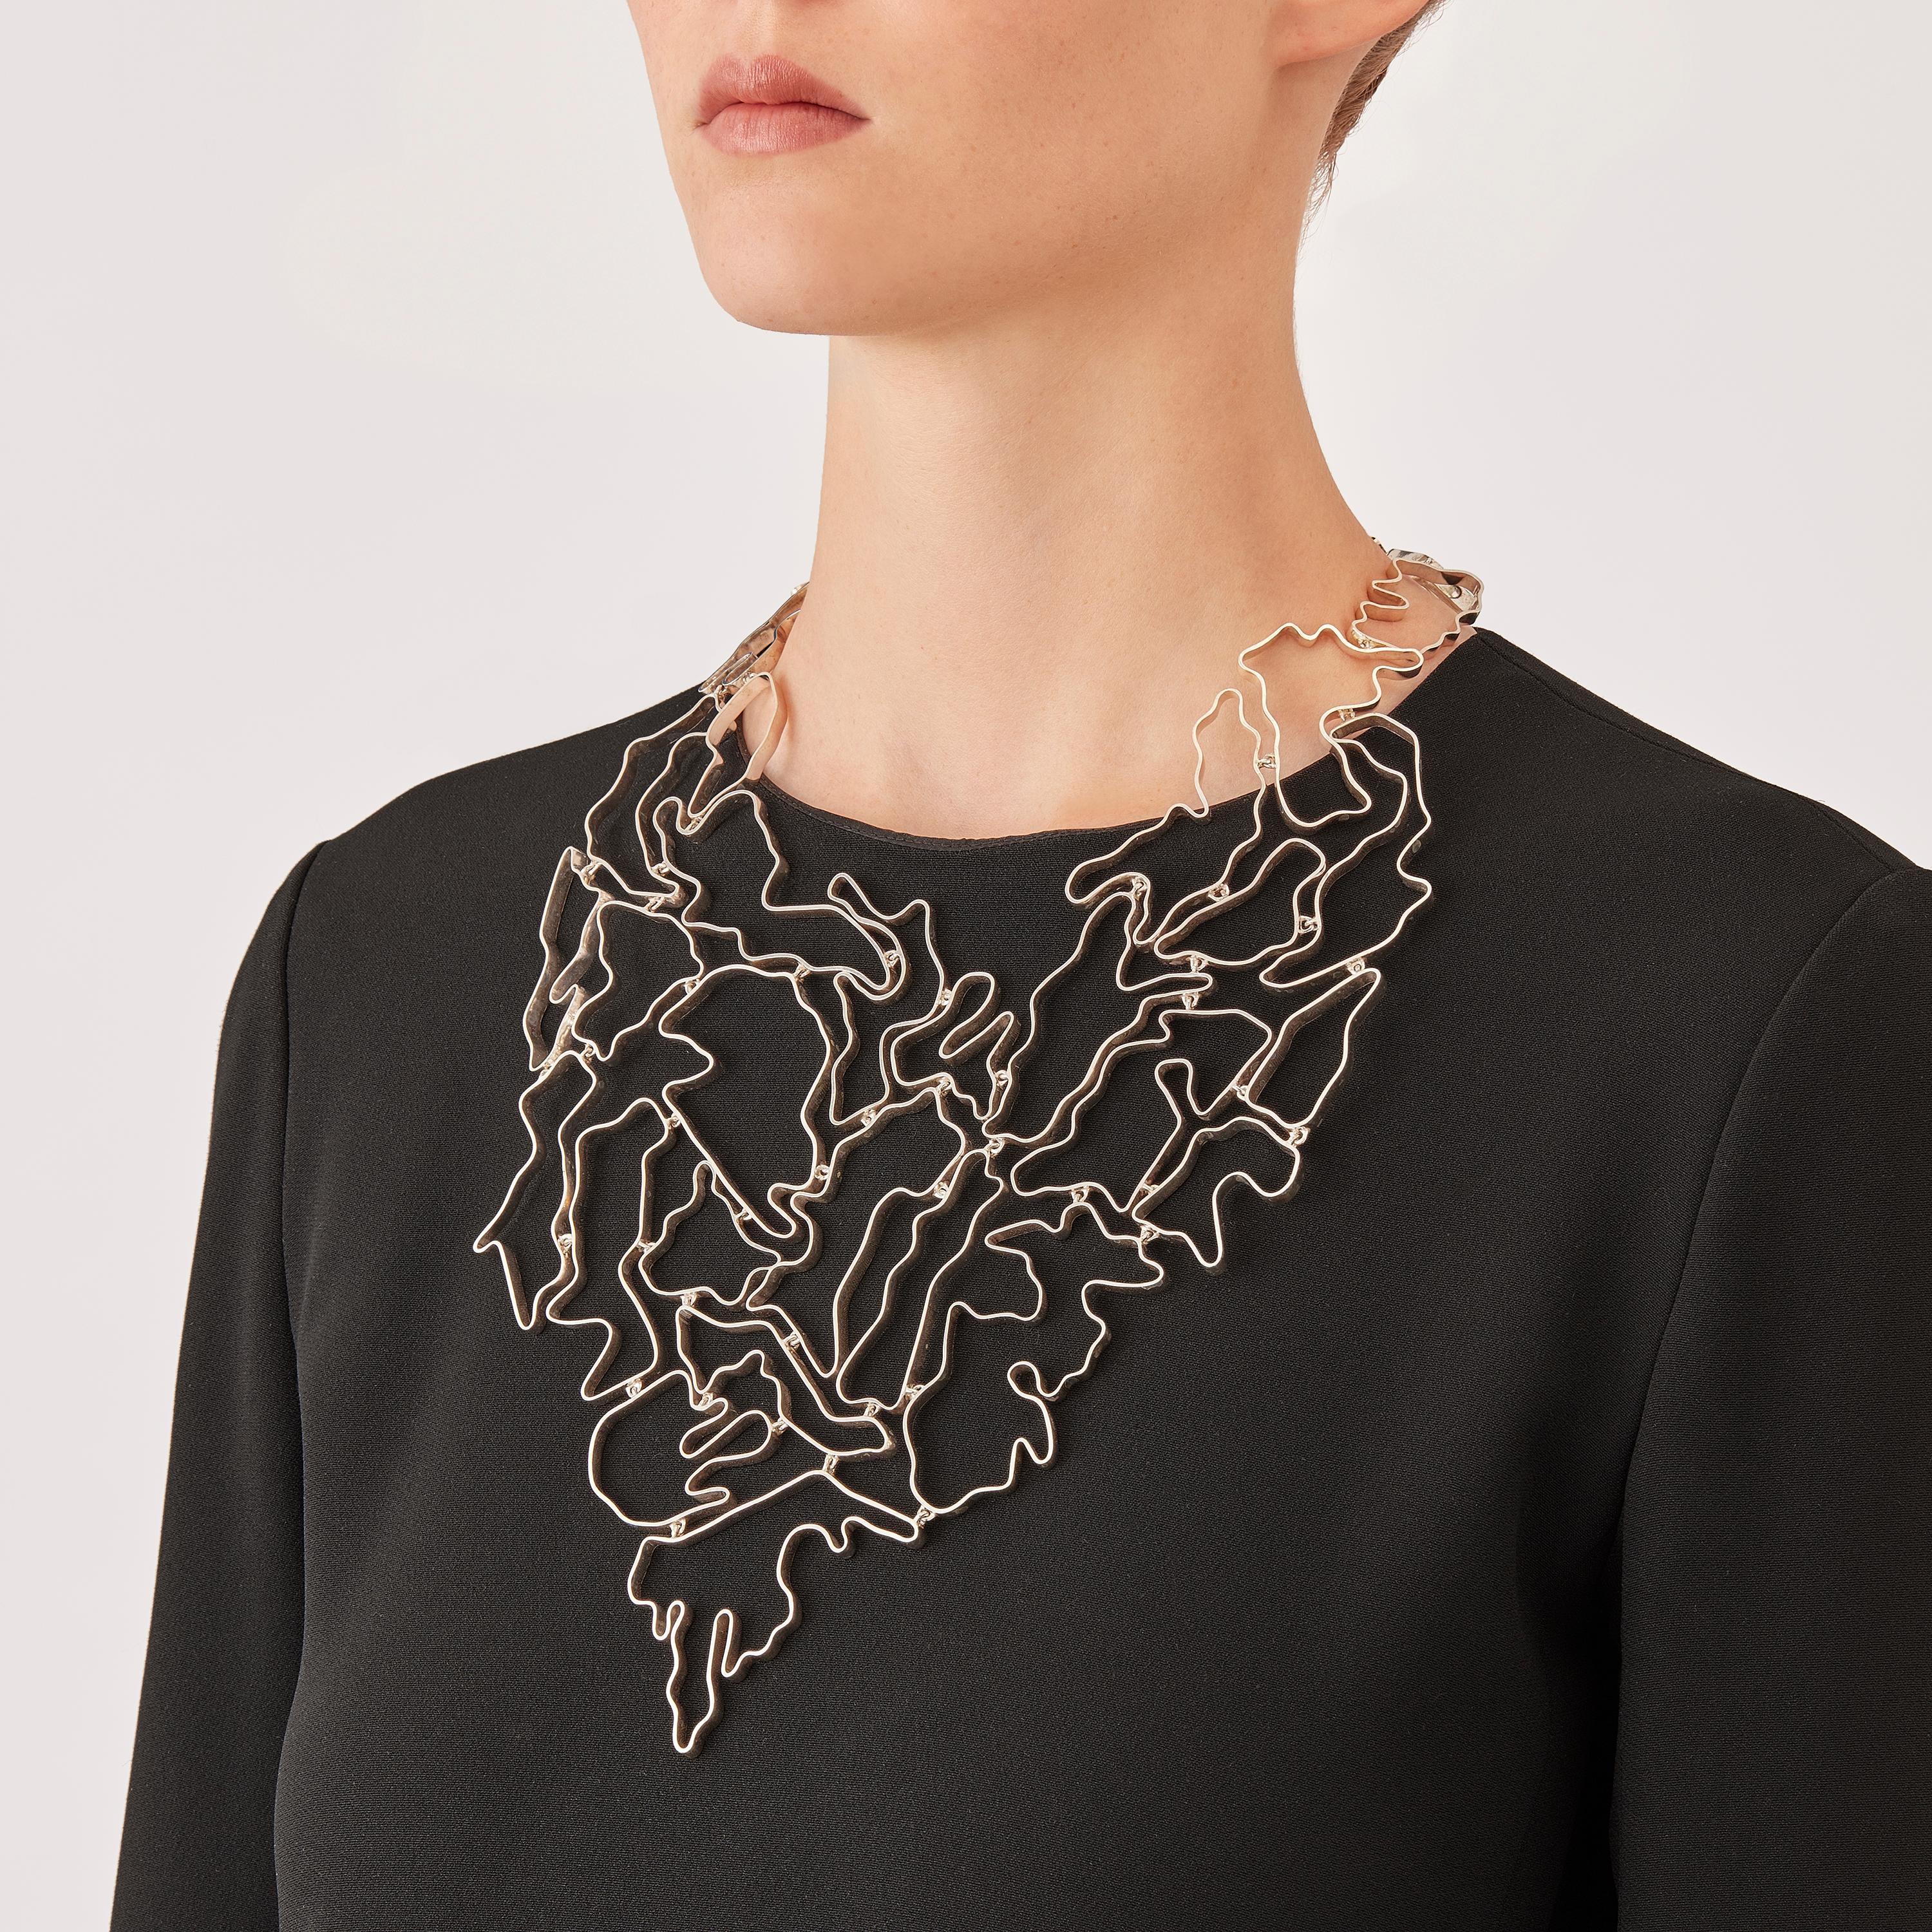 Made by hand in Nathalie Jean's Milan atelier in limited edition, the contemporary Informe Pectoral Necklace is composed of elements of varying dimensions in polished sterling silver ribbon. It's little connecting links allow the piece to drop on